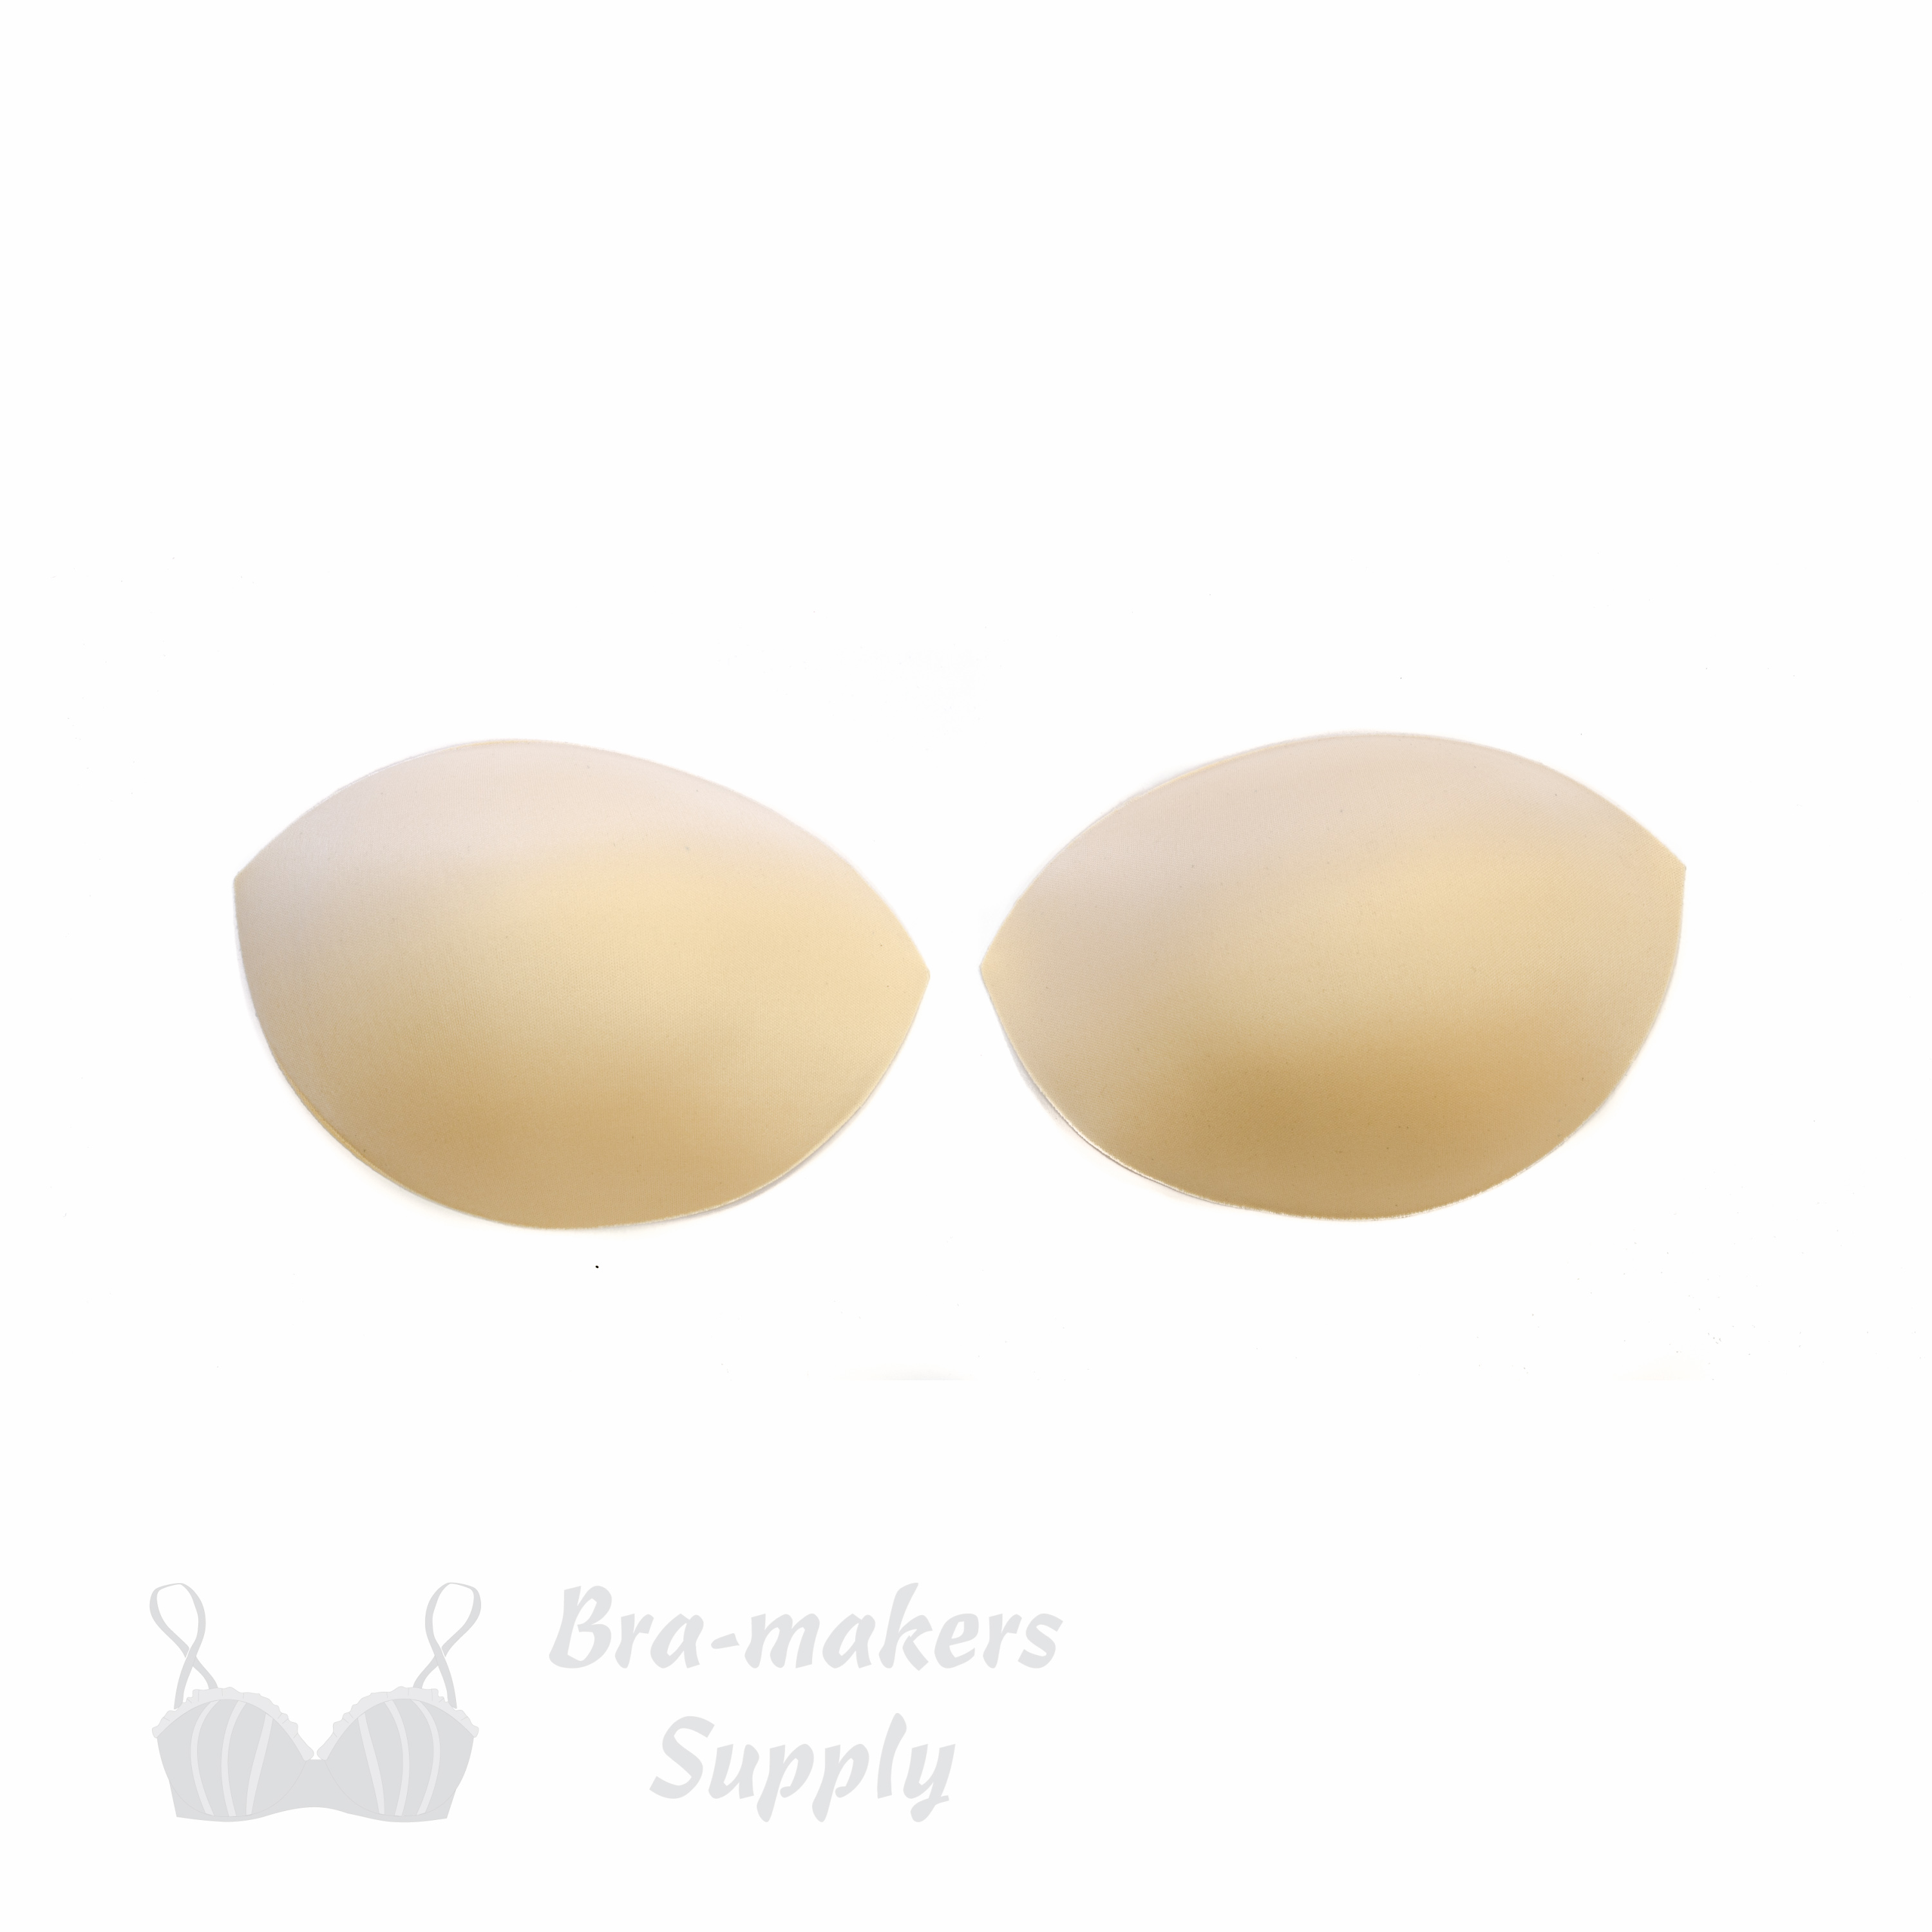 Non-Serged Molded Foam Sew-In Bra Cups - 1 Pair/Pack - Cleaner's Supply